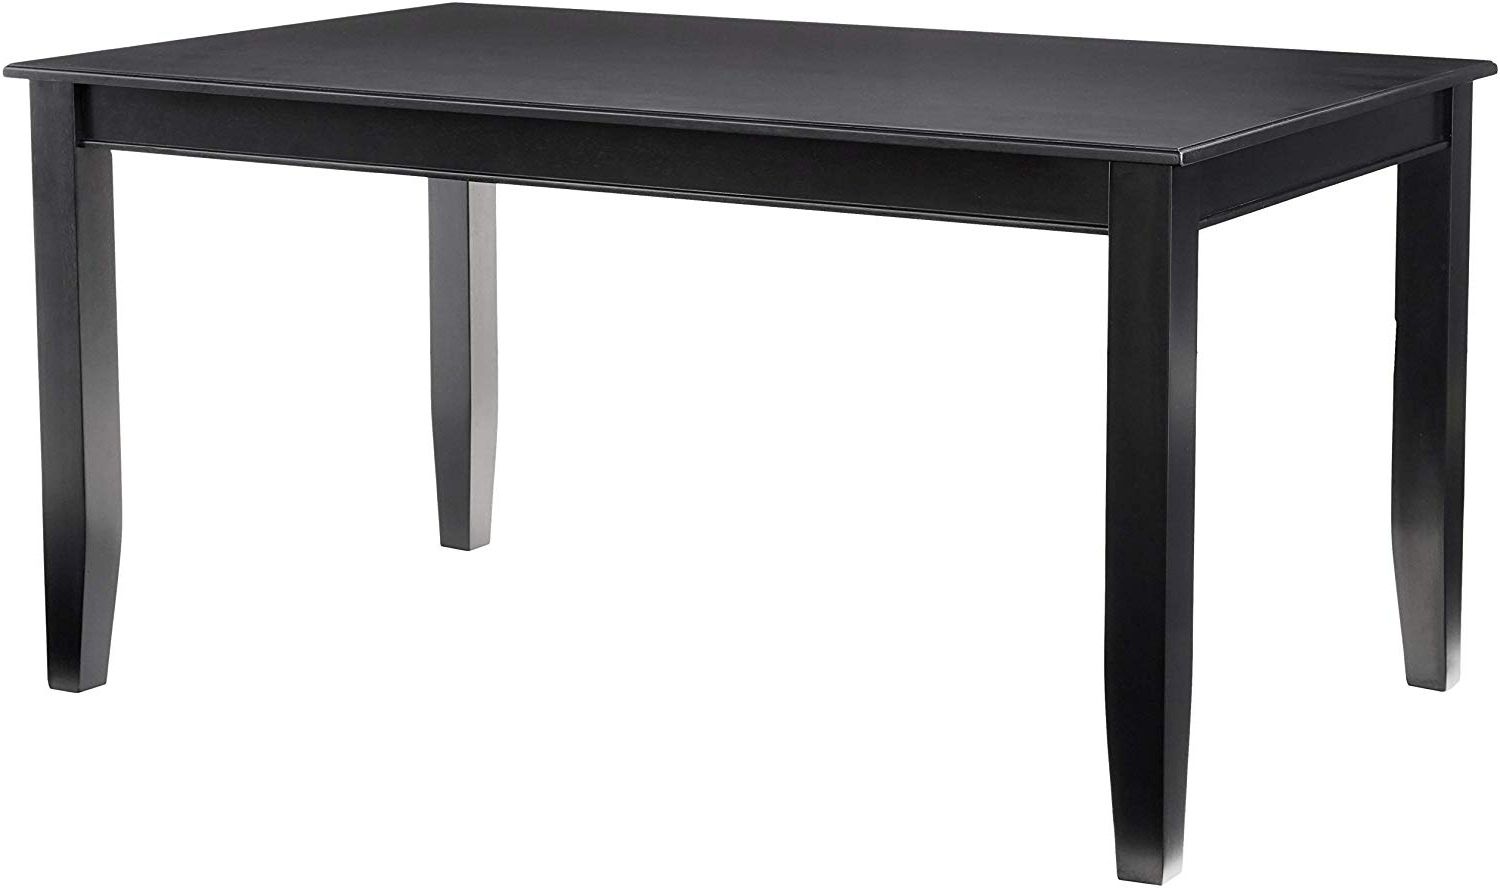 Trendy Dudley Rectangular Dining Table 36"x60" In Black Finish With Rectangular Dining Tables (View 10 of 25)